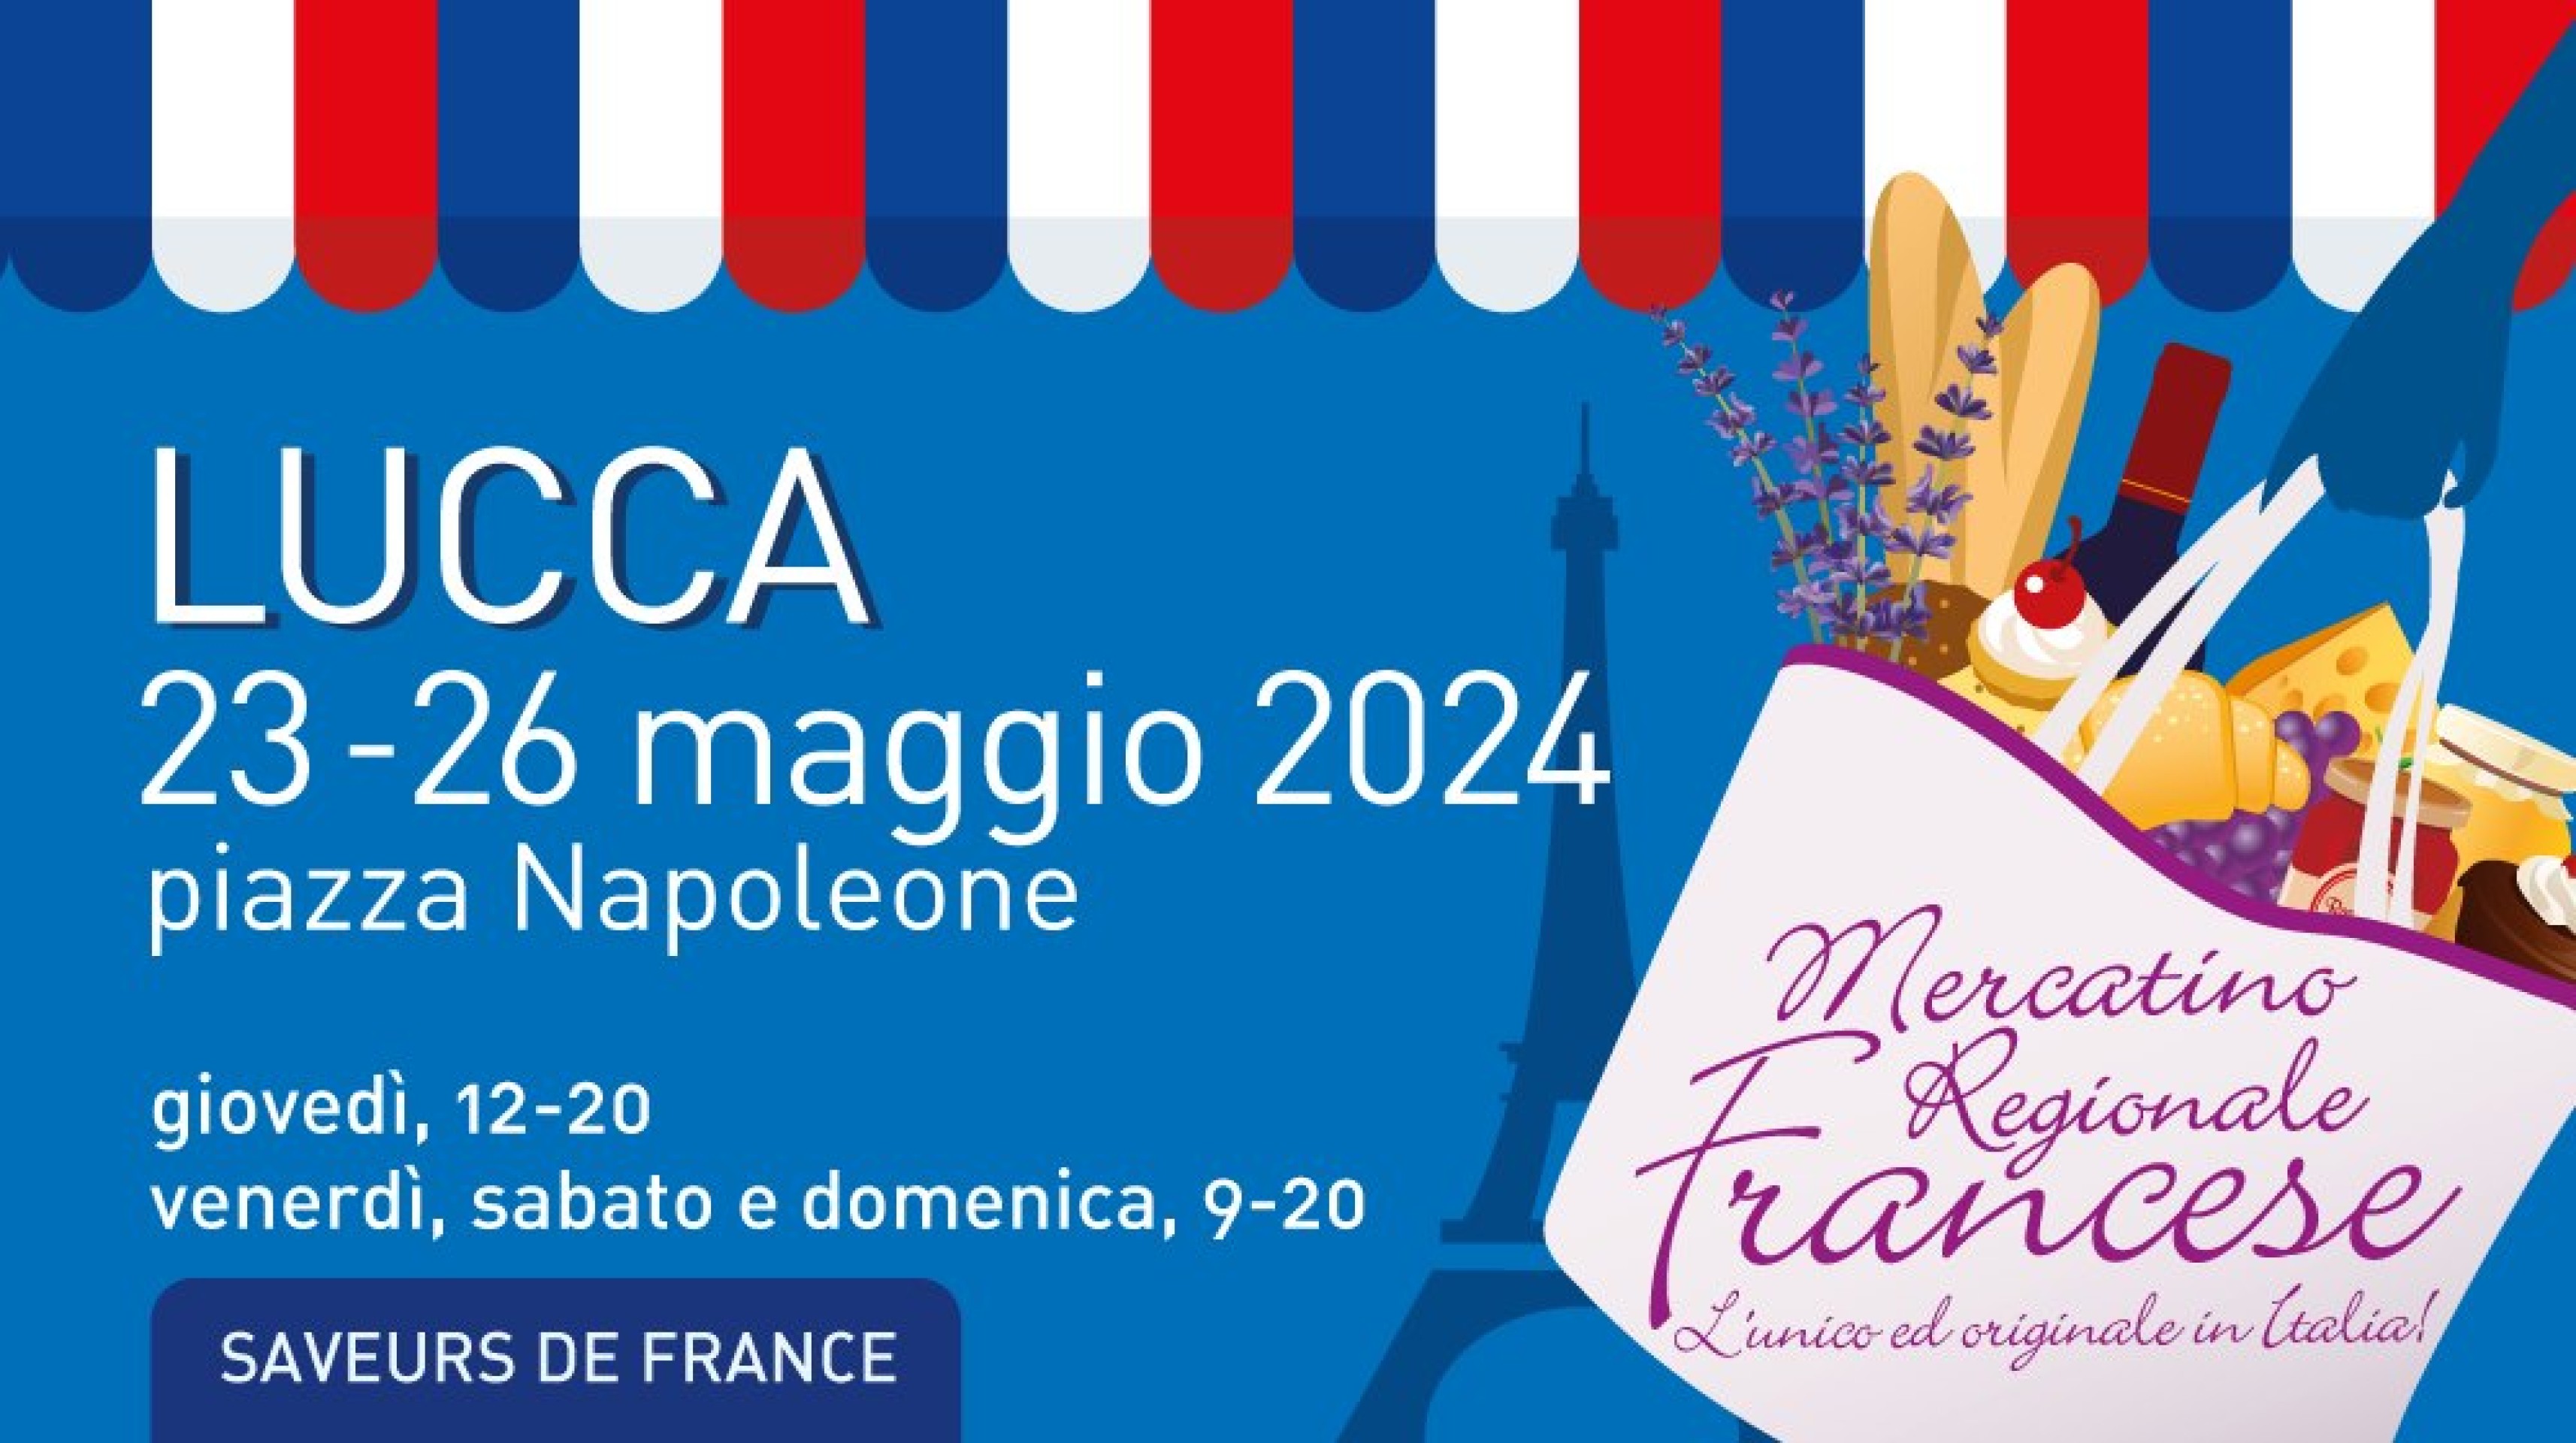 MERCATINO REGIONALE FRANCESE a LUCCA 2024